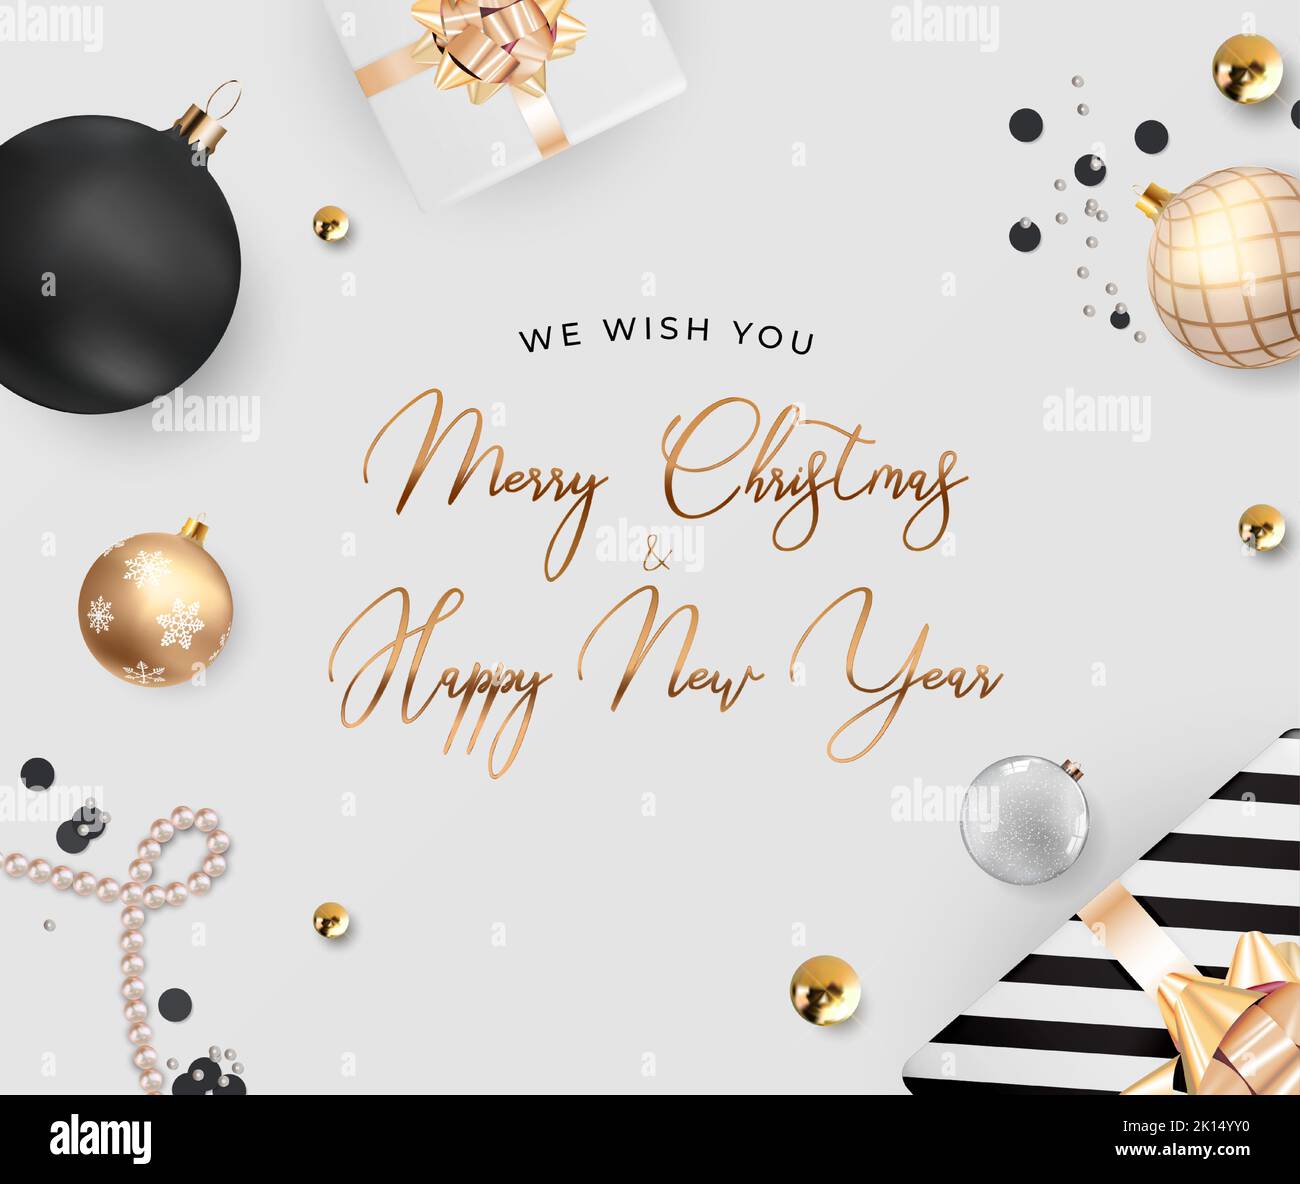 Greeting Card Merry Christmas Happy New Year. Vector Illustration Stock Vector